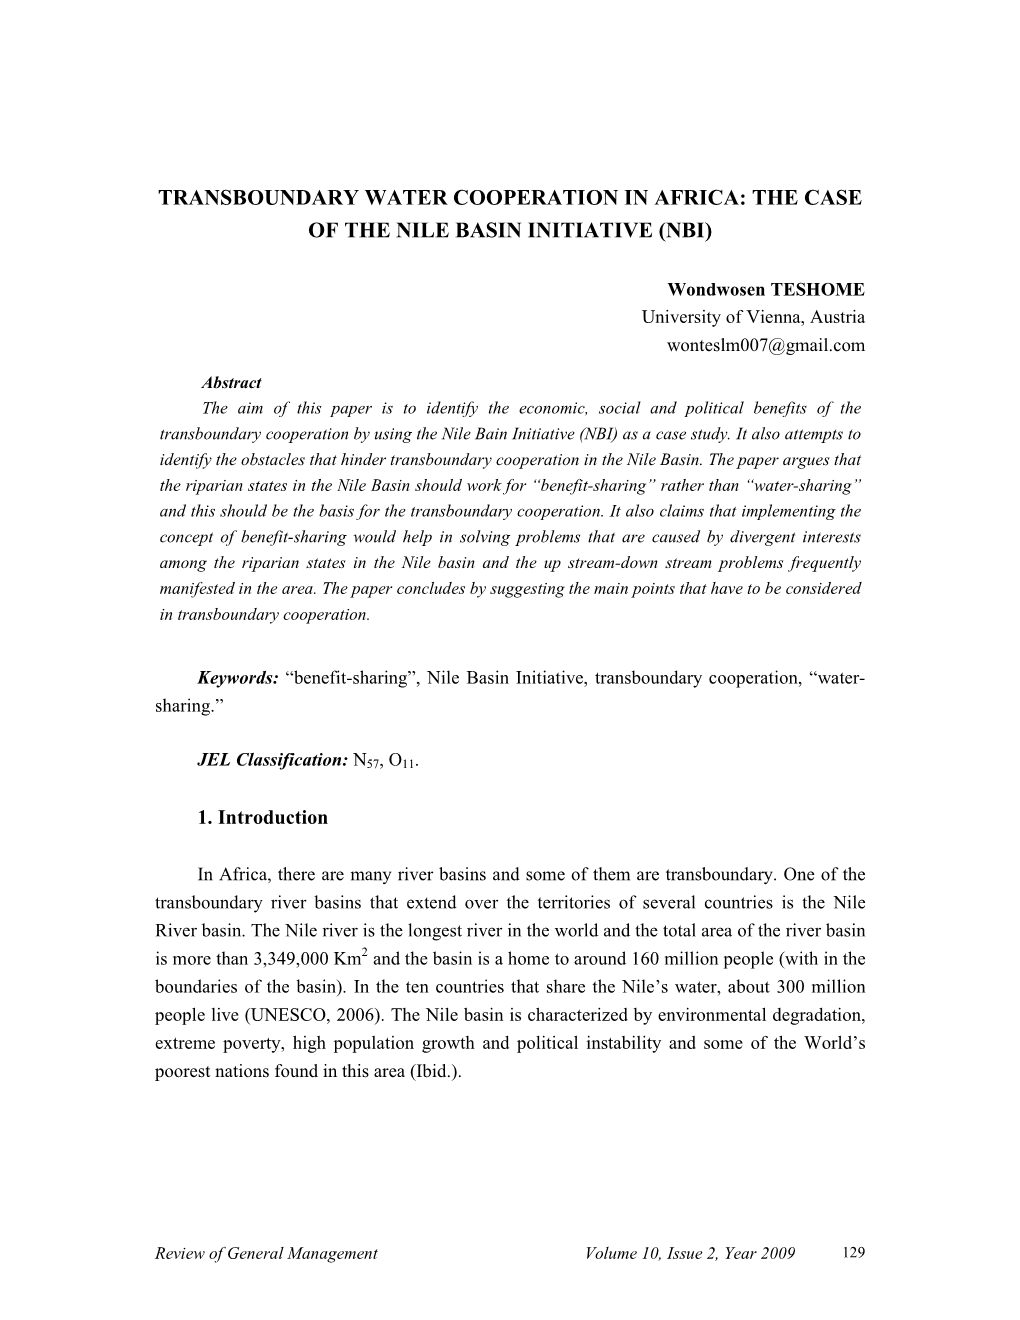 Transboundary Water Cooperation in Africa: the Case of the Nile Basin Initiative (Nbi)